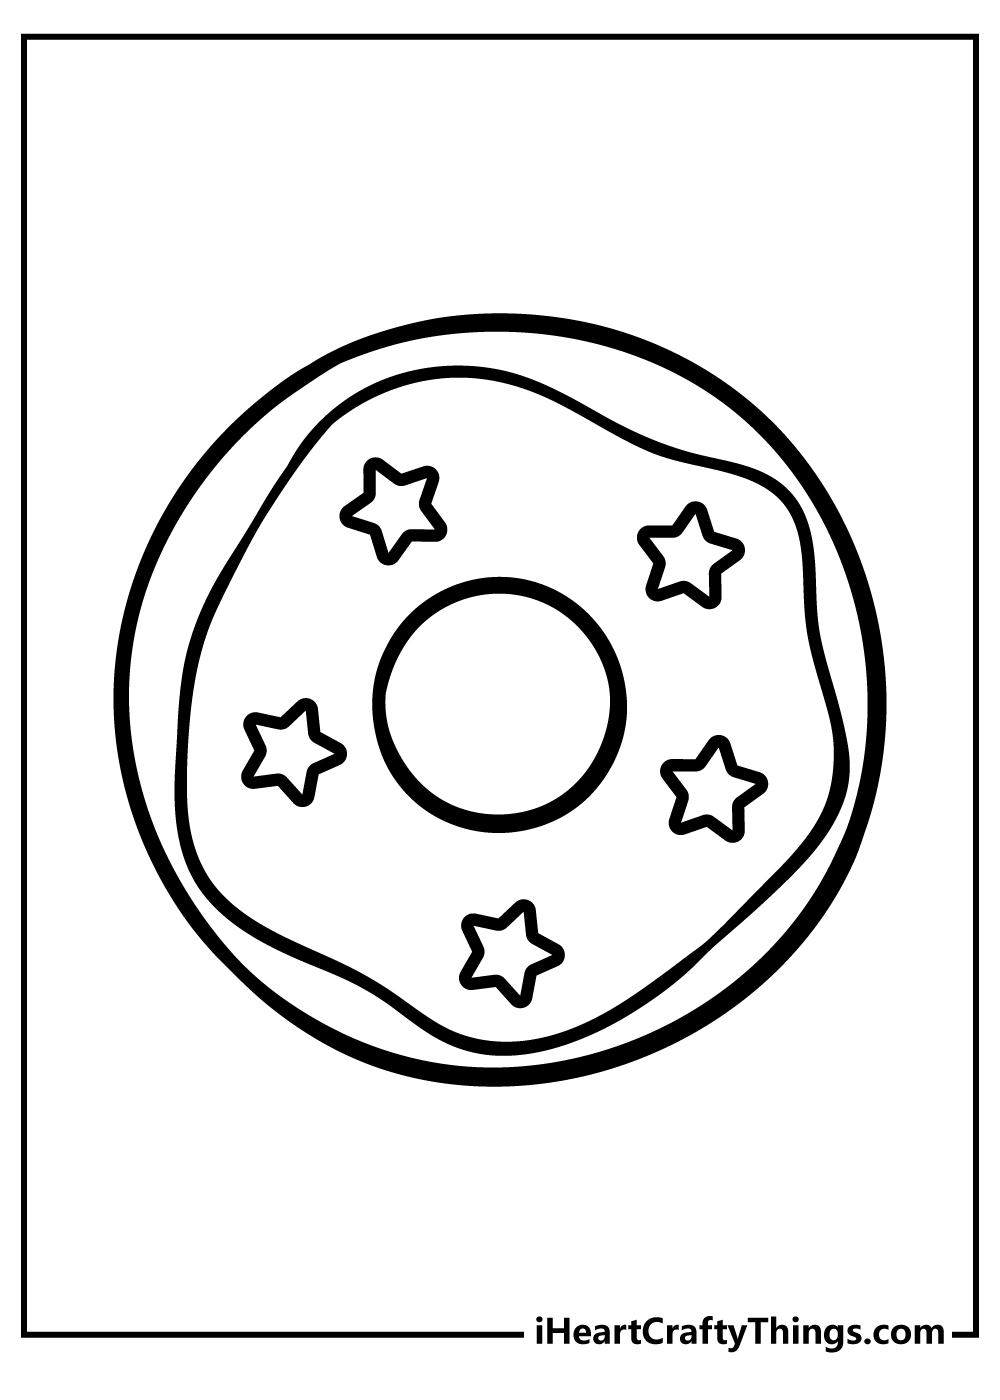 Printable Donut Coloring Pages Updated 20